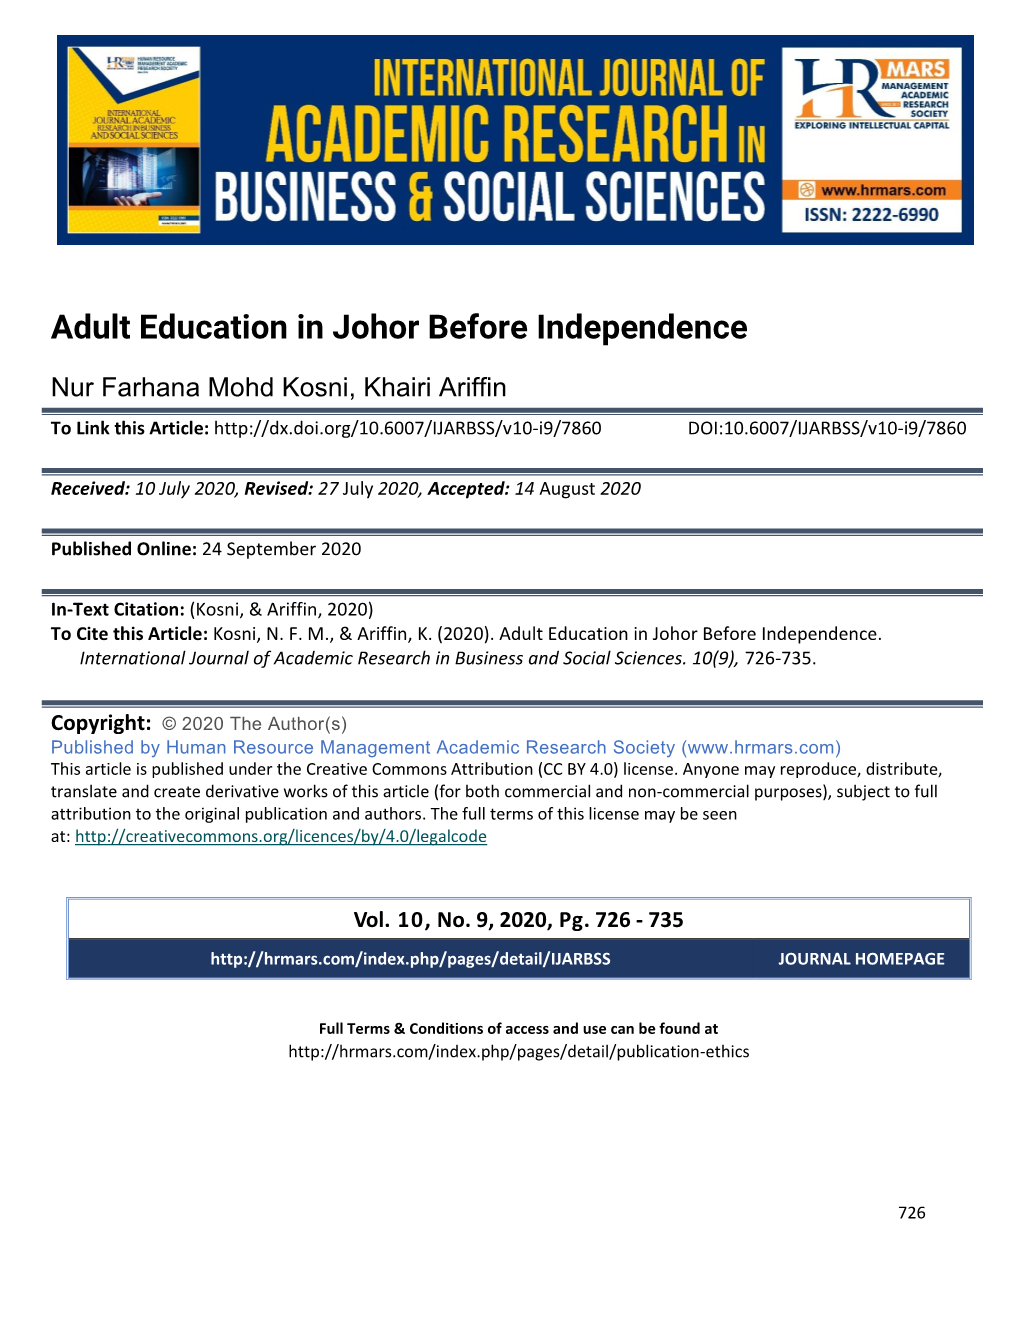 Adult Education in Johor Before Independence